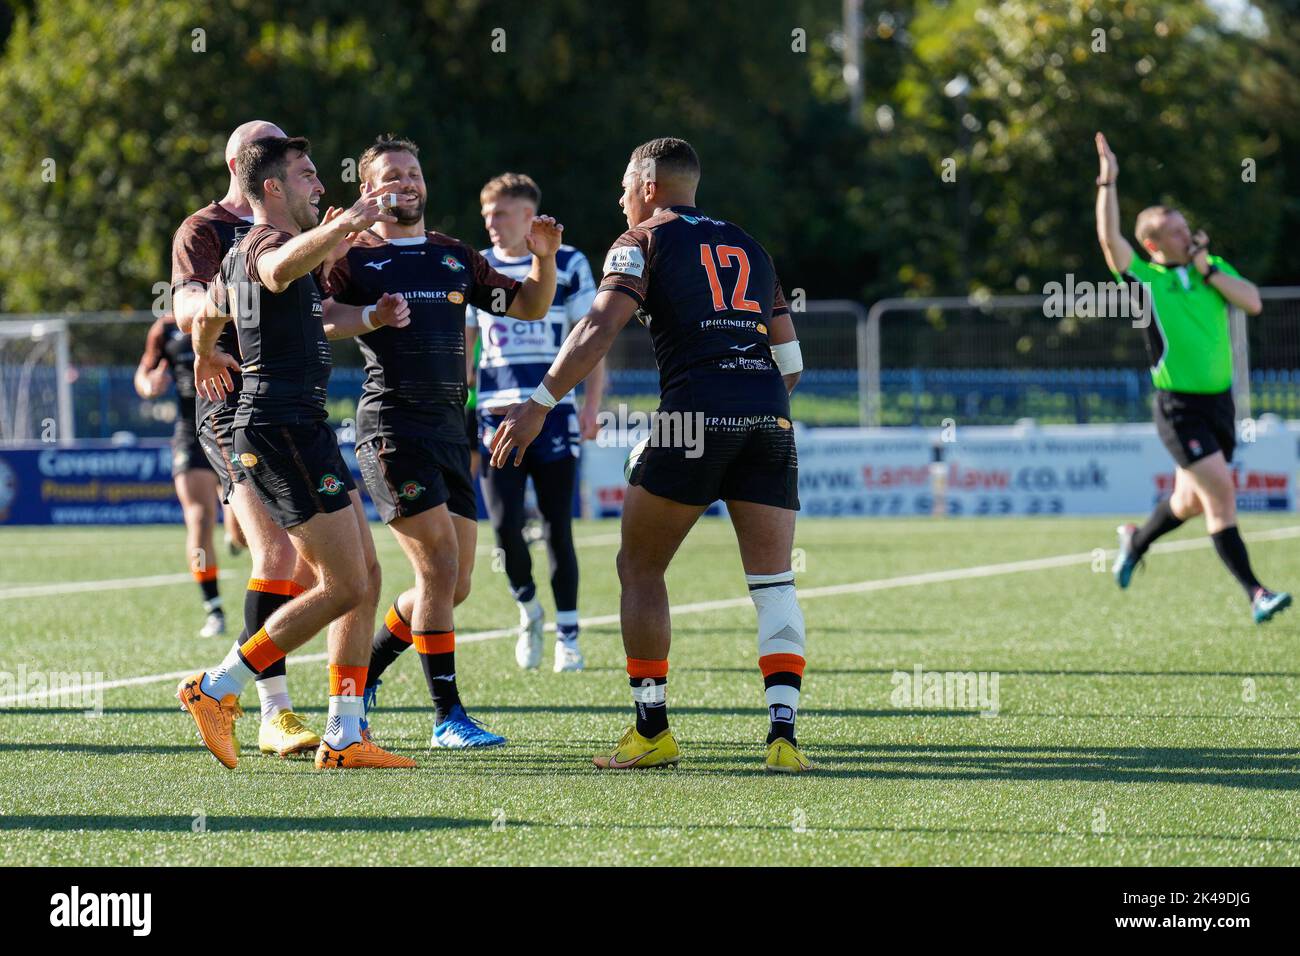 Reuben BIRD-TULLOCH (12) of Ealing Trailfinders celebrates after he scores his team’s fourth try during the Greene King IPA Championship match between Coventry and Ealing Trailfinders at Butts Arena, Coventry, England on 1 October 2022. Photo by David Horn. Stock Photo